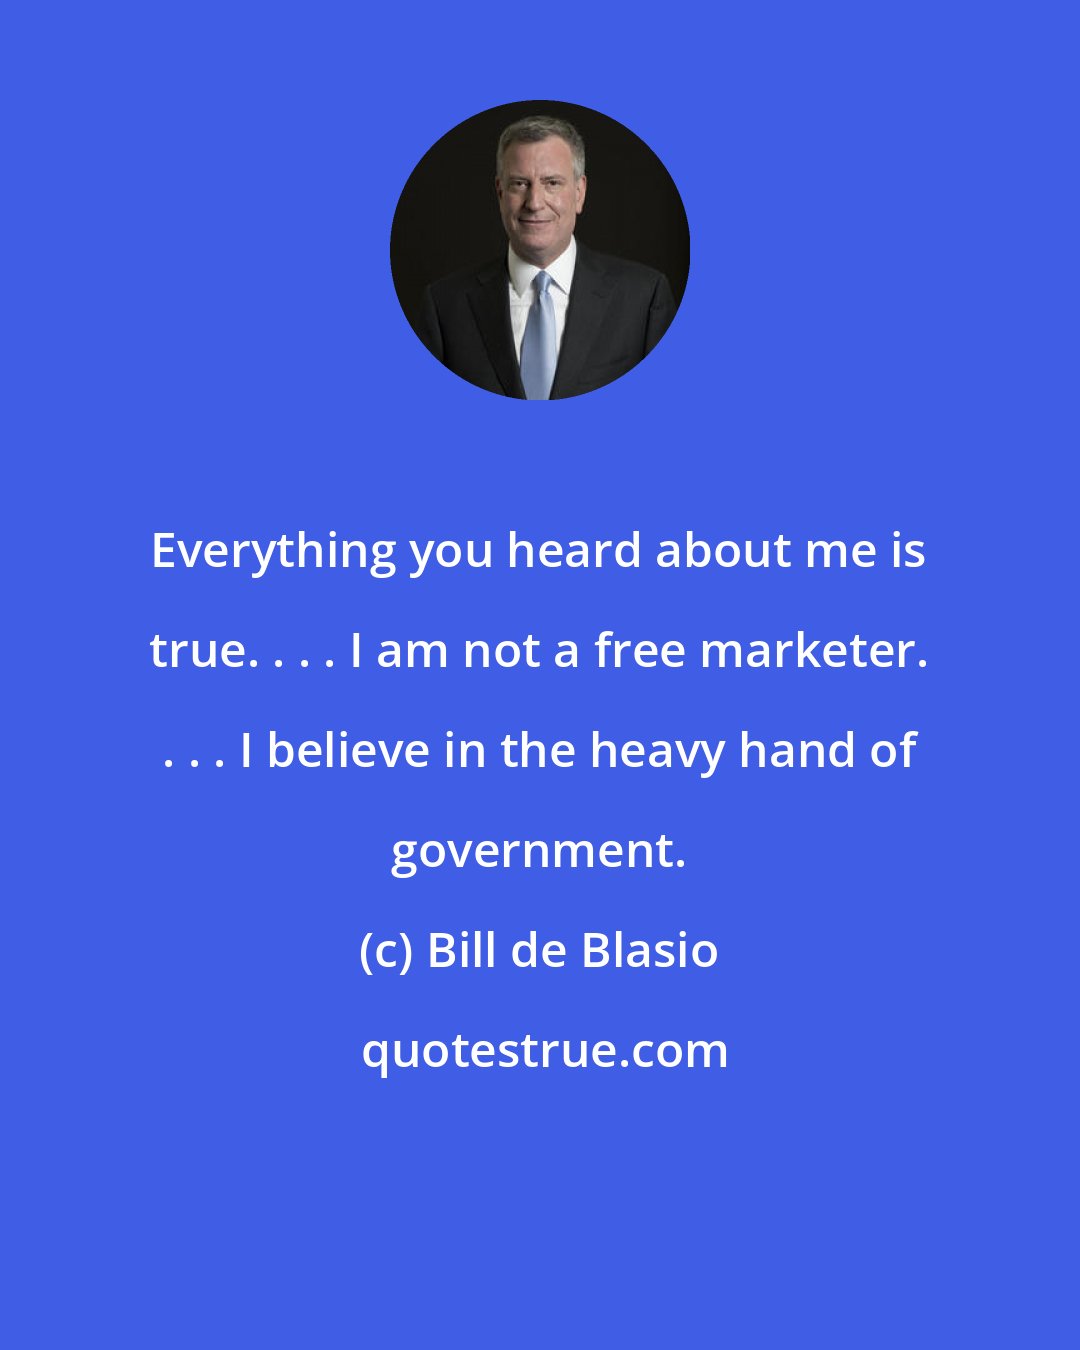 Bill de Blasio: Everything you heard about me is true. . . . I am not a free marketer. . . . I believe in the heavy hand of government.